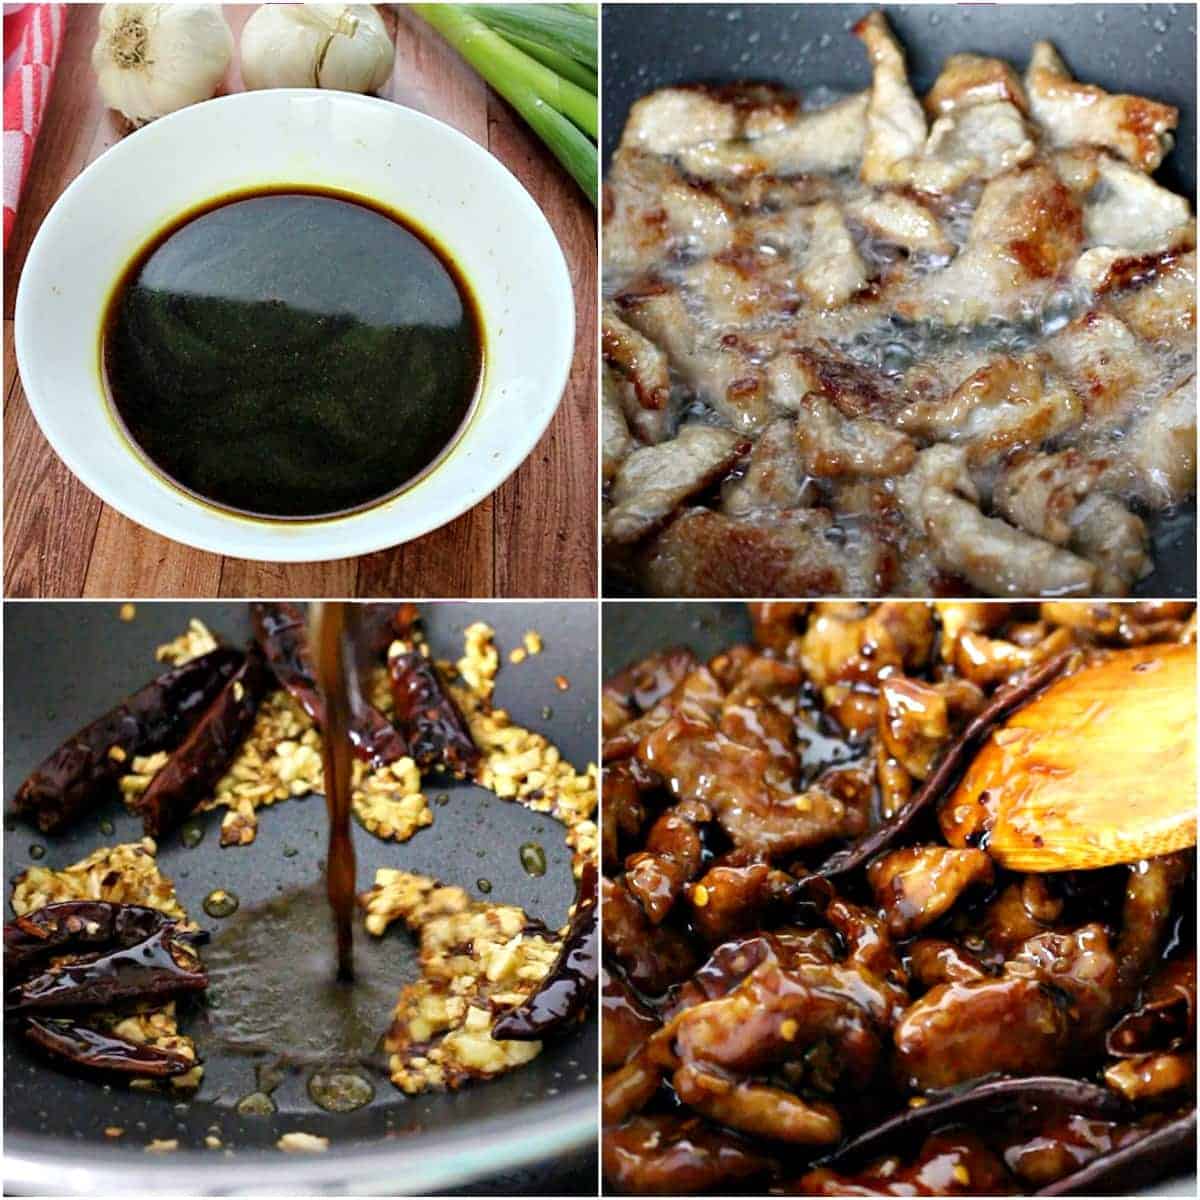 Process shots of Mongolian sauce, fried beef and beef stir fry